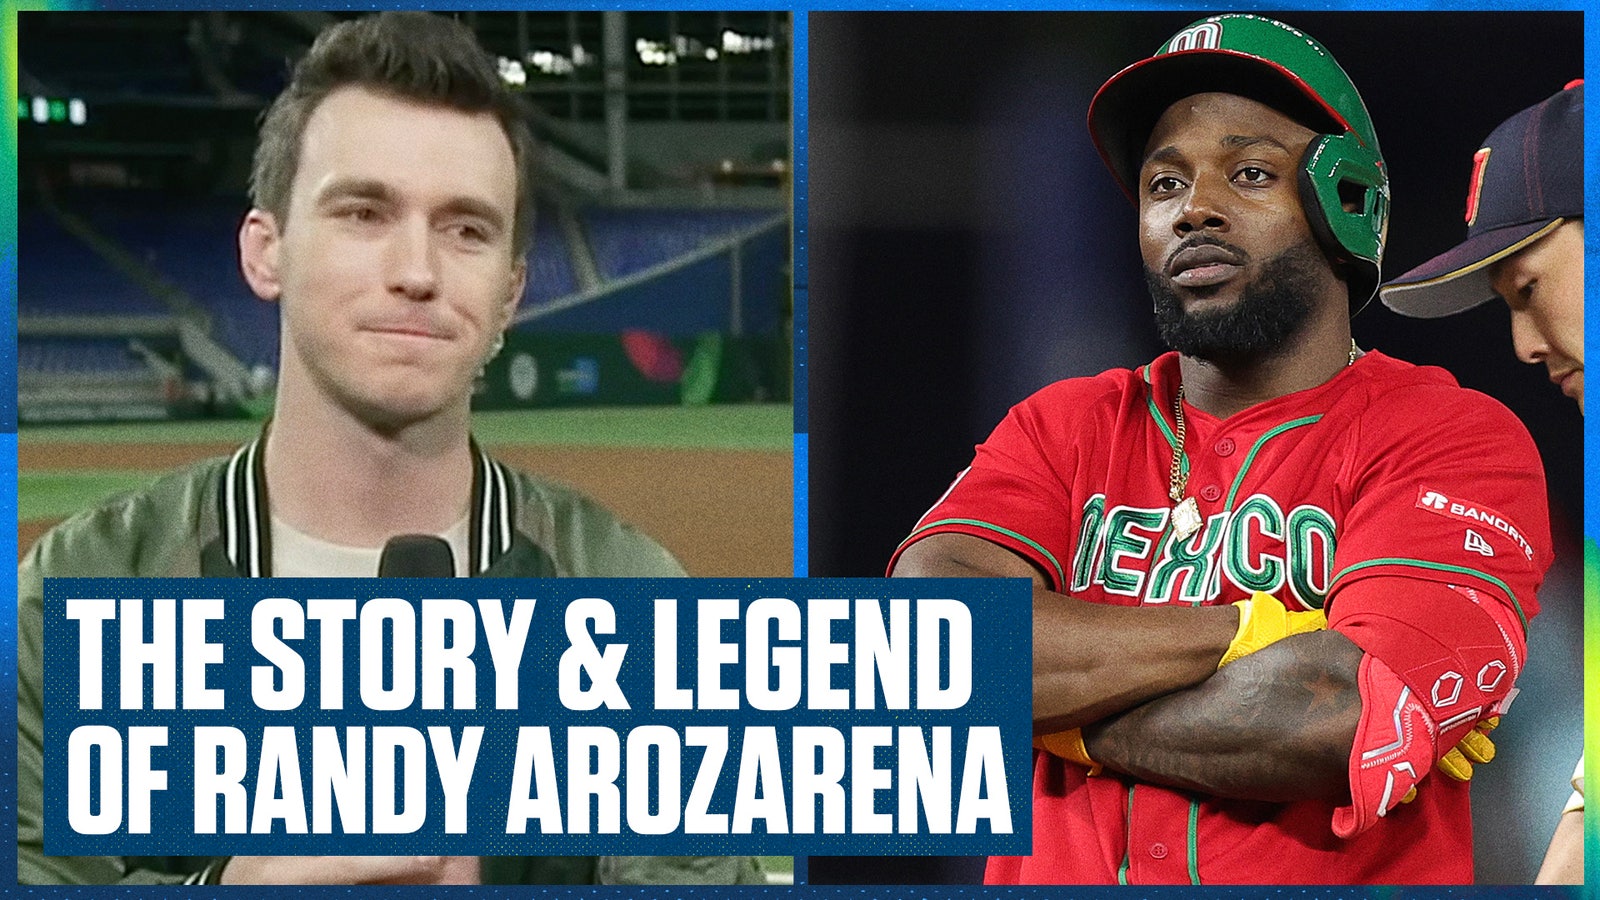 Randy Arozarena was the player of the WBC, but his story is even better